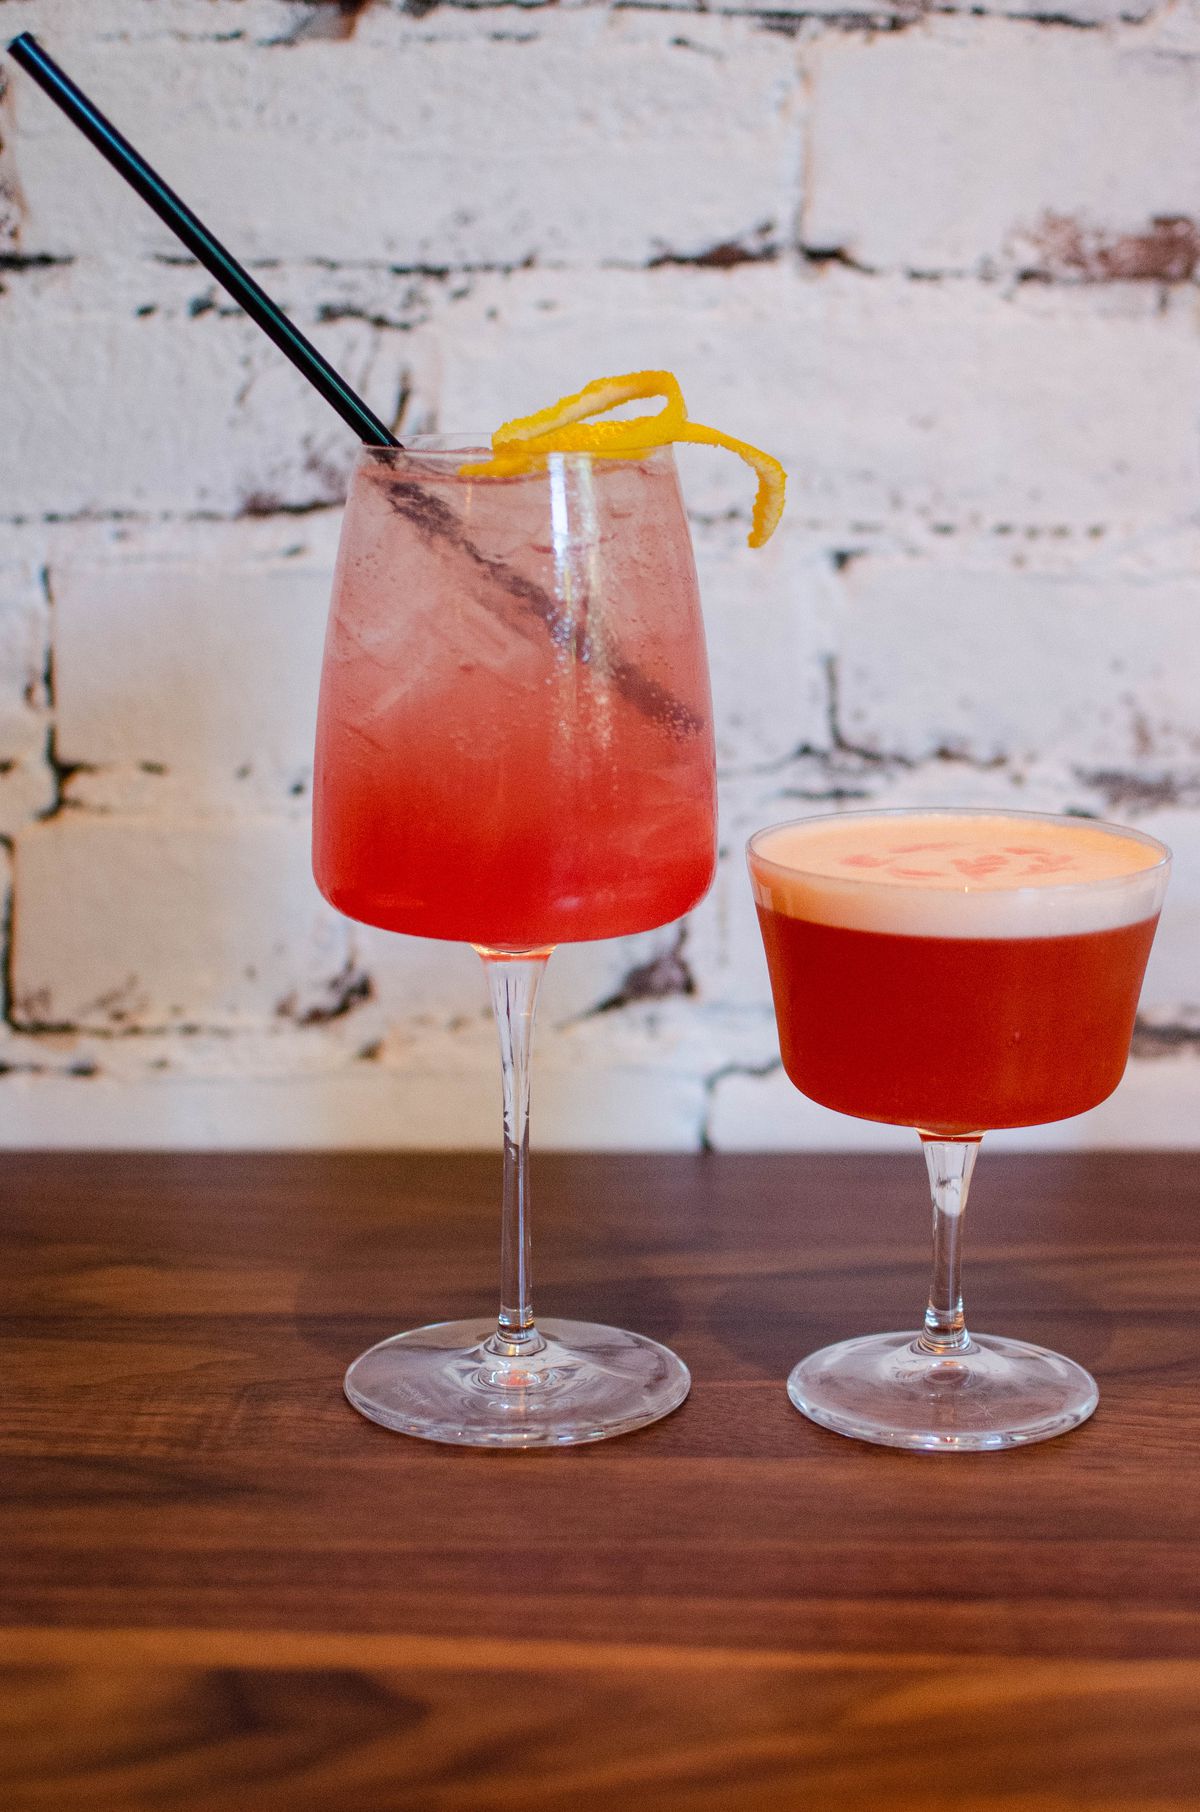 Two pinkish cocktails, one with a foamy top, sit on a wooden table in front of a rustic white brick background.